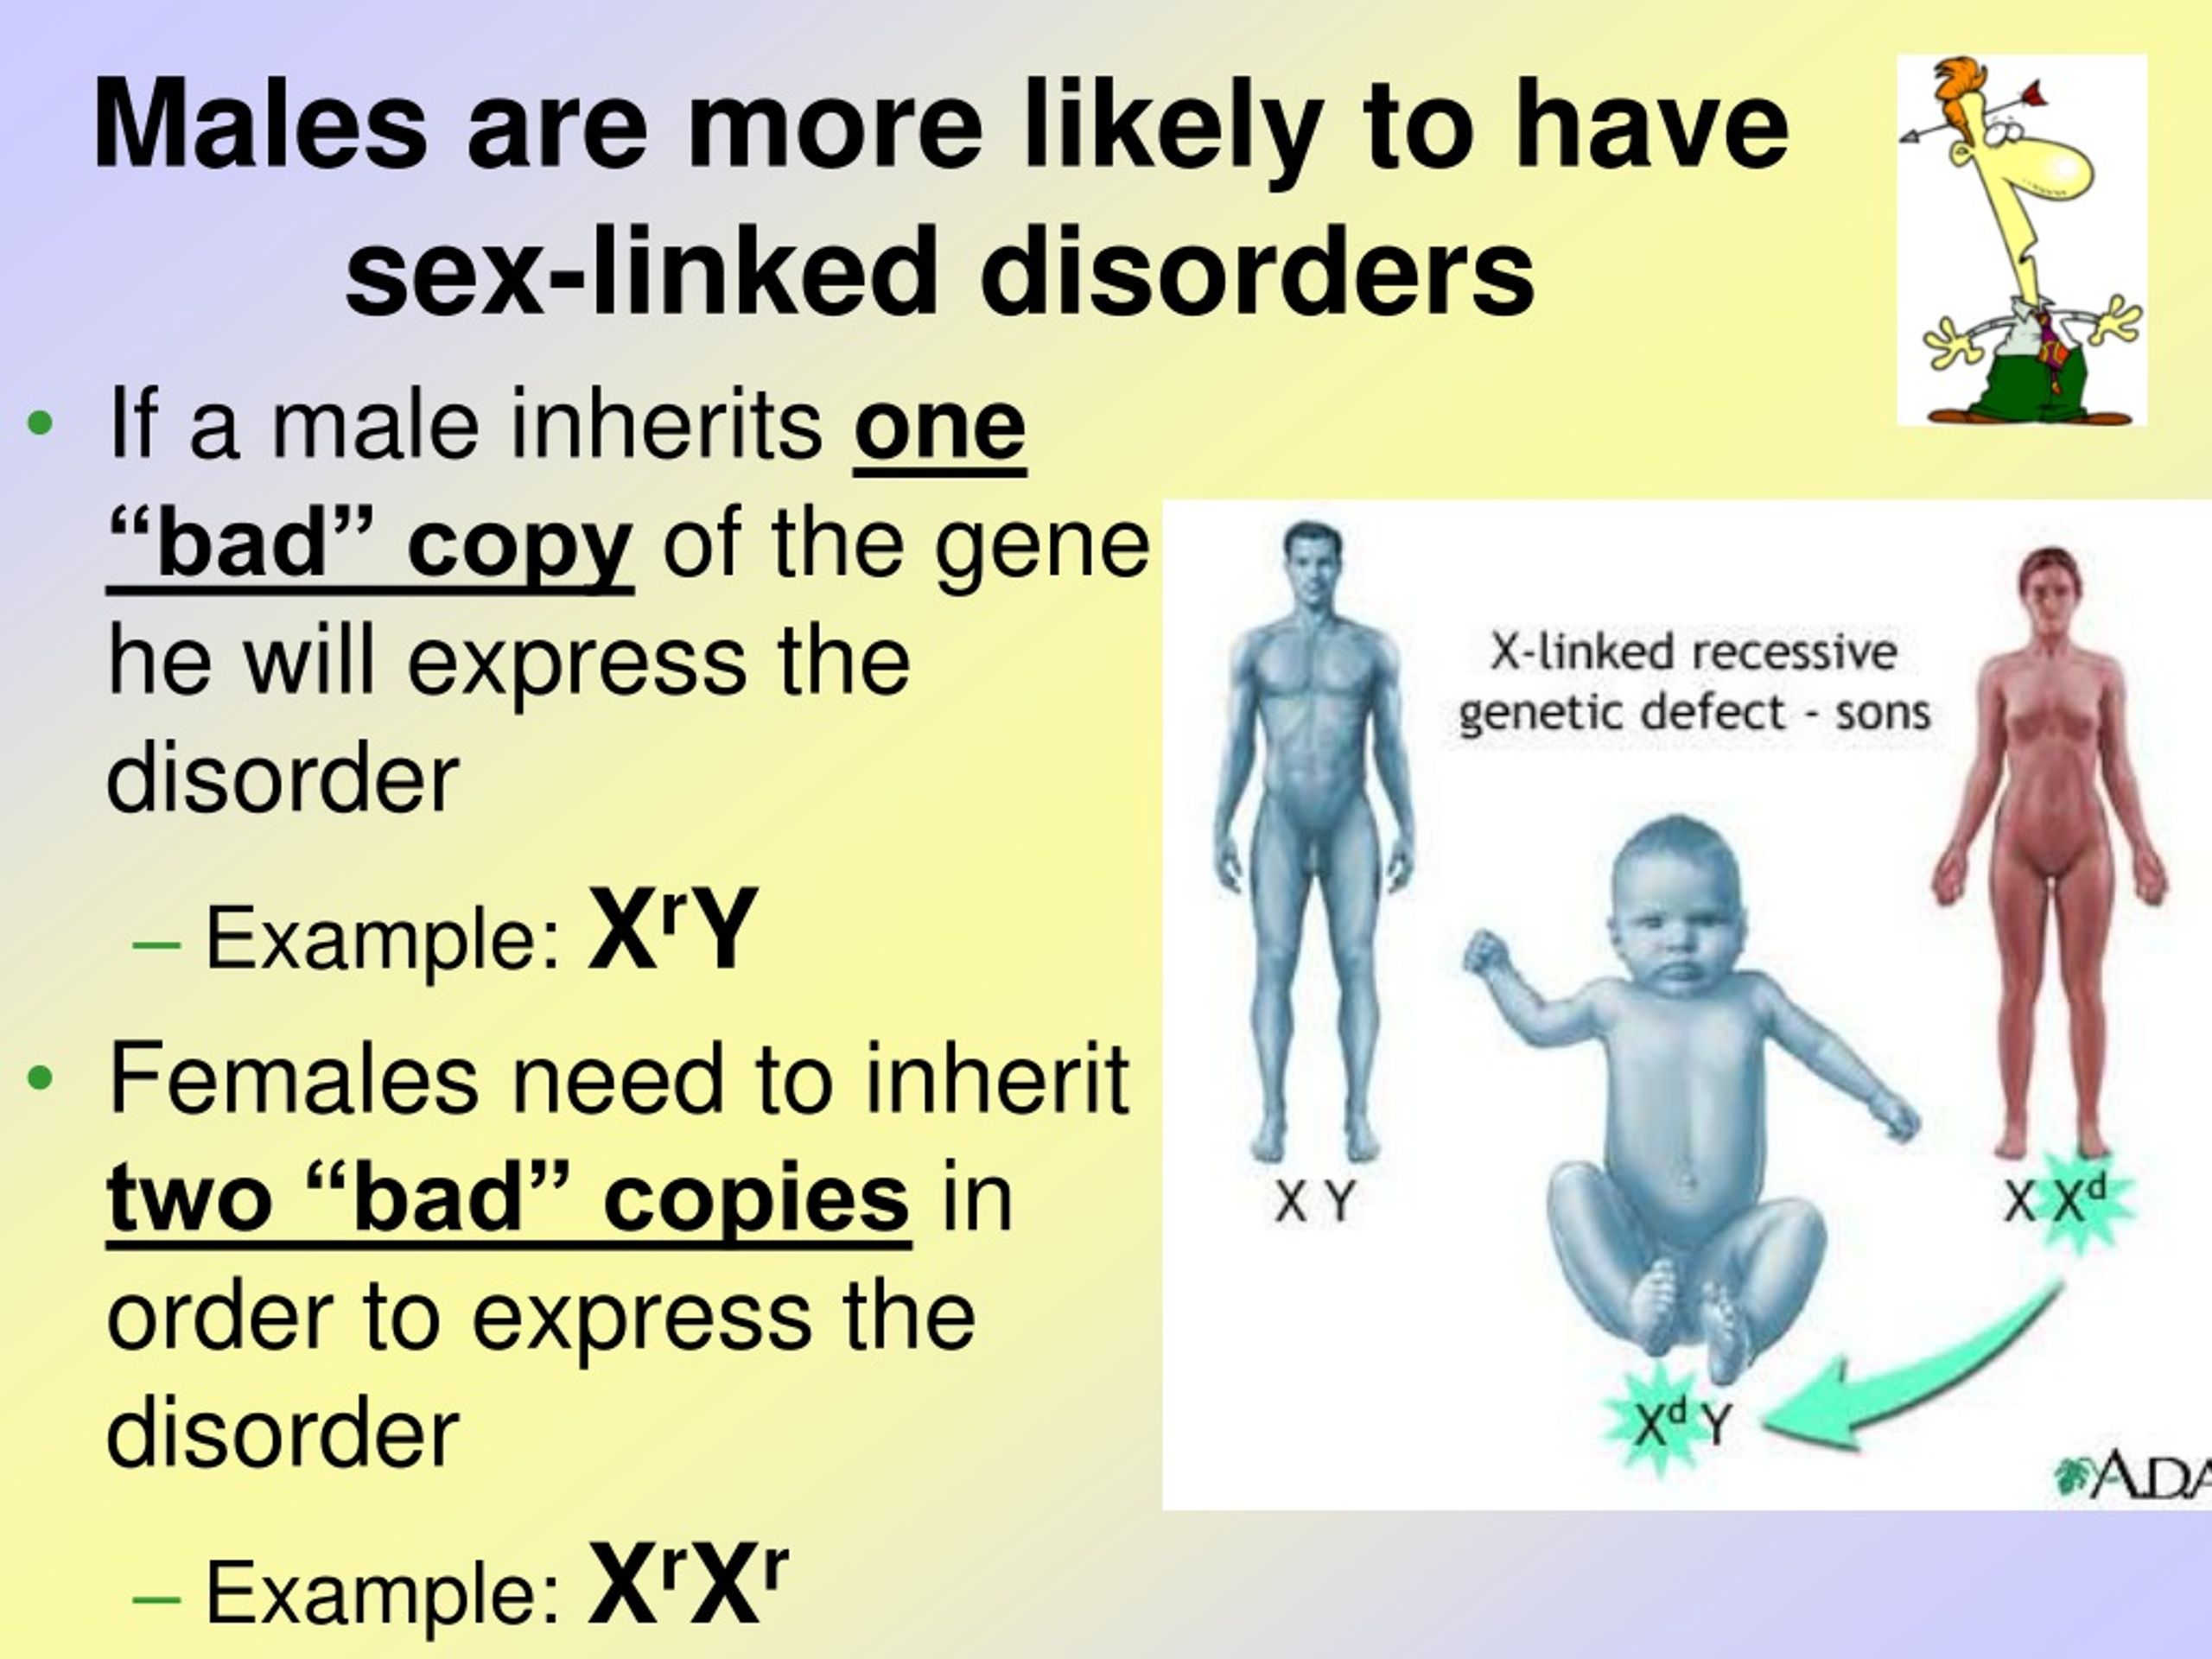 Ppt Sex Linked Traits Powerpoint Presentation Free Download Id 485642